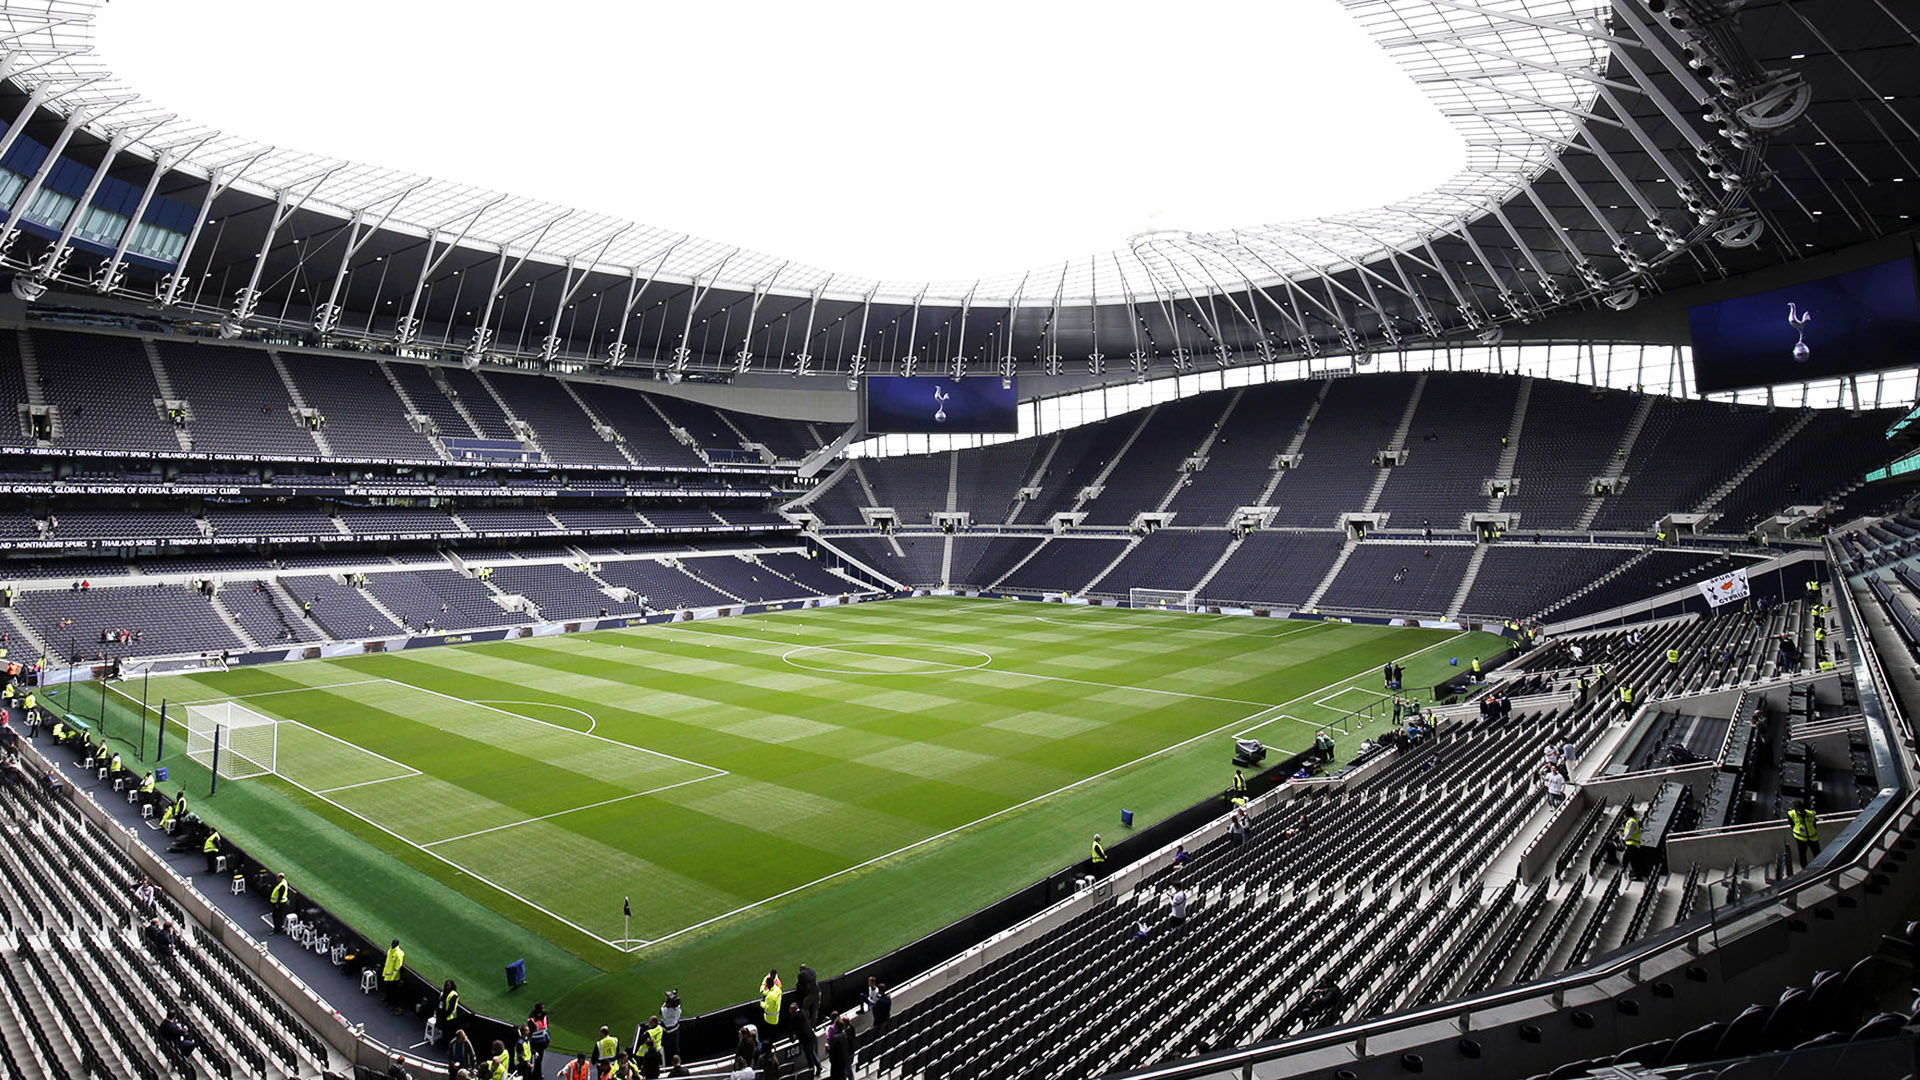 Tottenham Hotspur FC: The third-largest football stadium in England and the largest club ground in London. 1920x1080 Full HD Background.